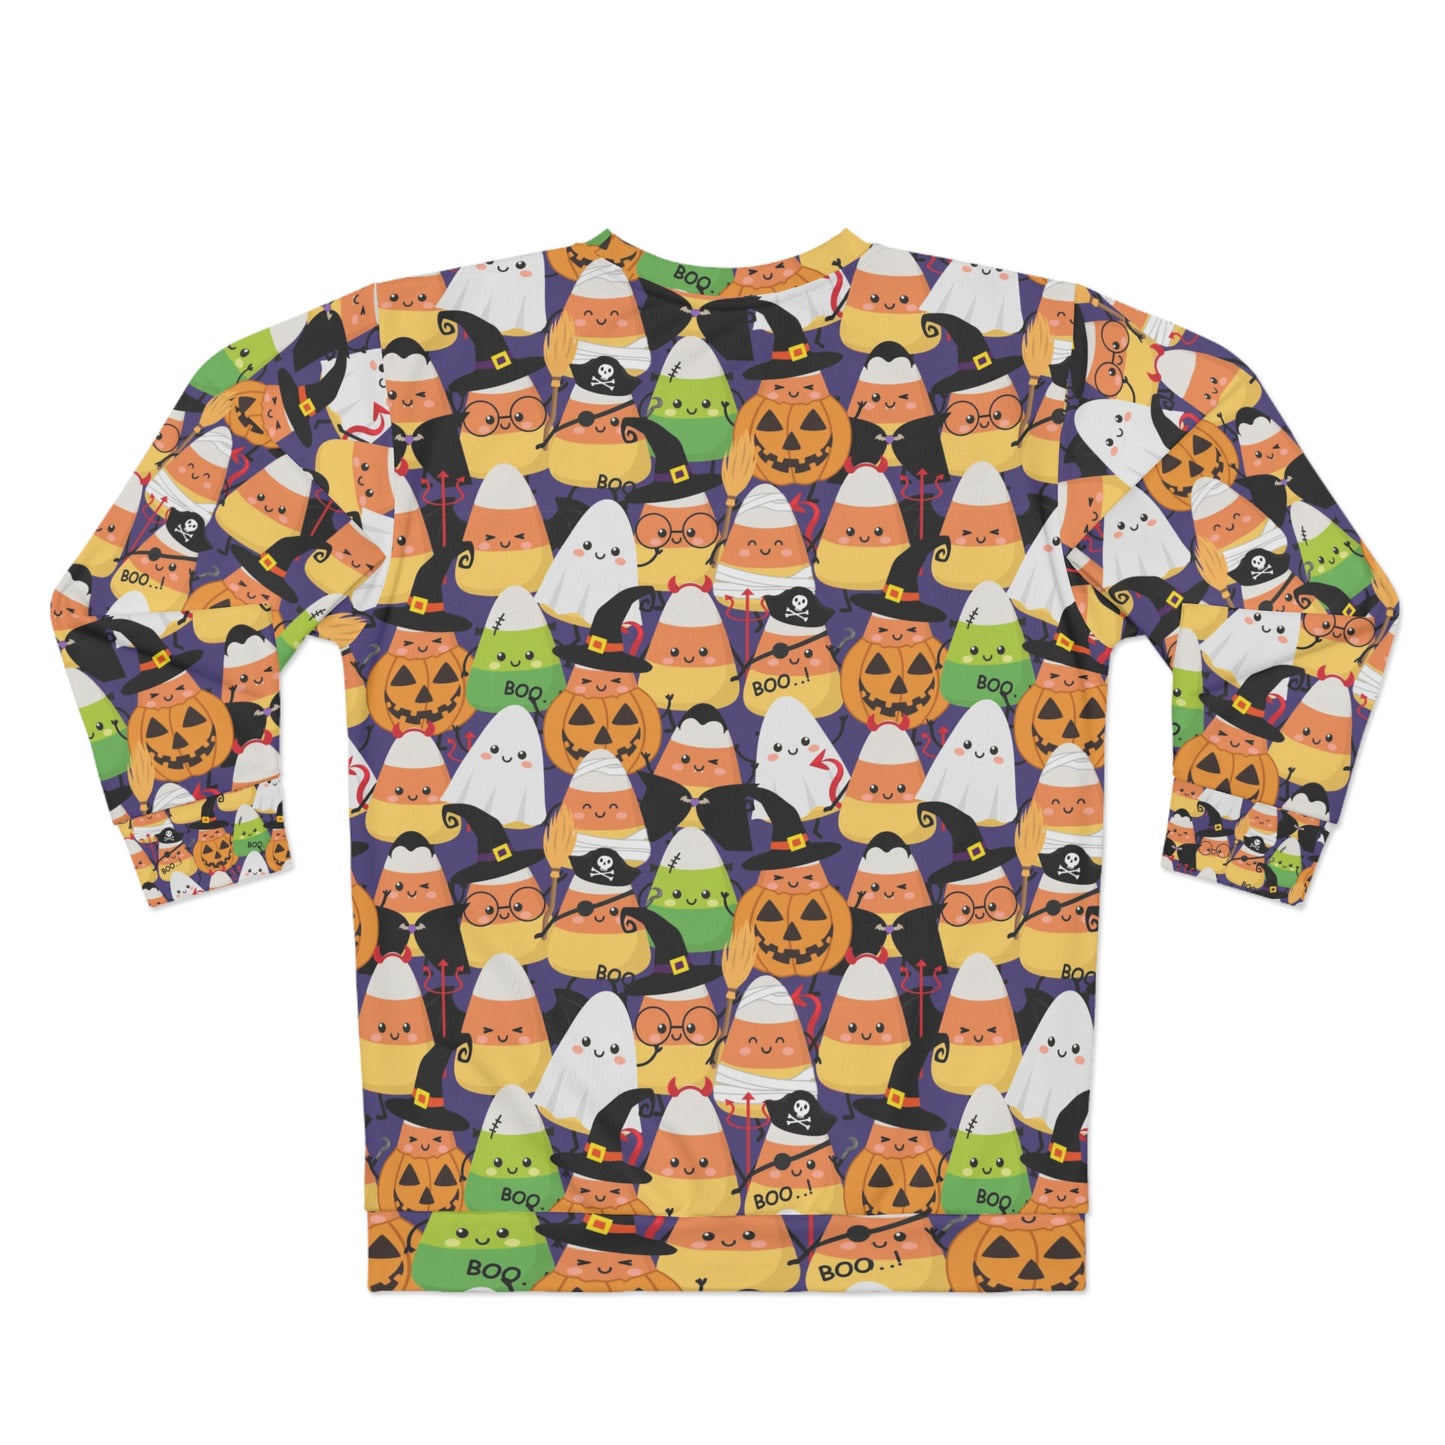 Cute candy corn with Halloween costumes Unisex Sweatshirt for Halloween lover and candy corn lover. LIMITED TIME.